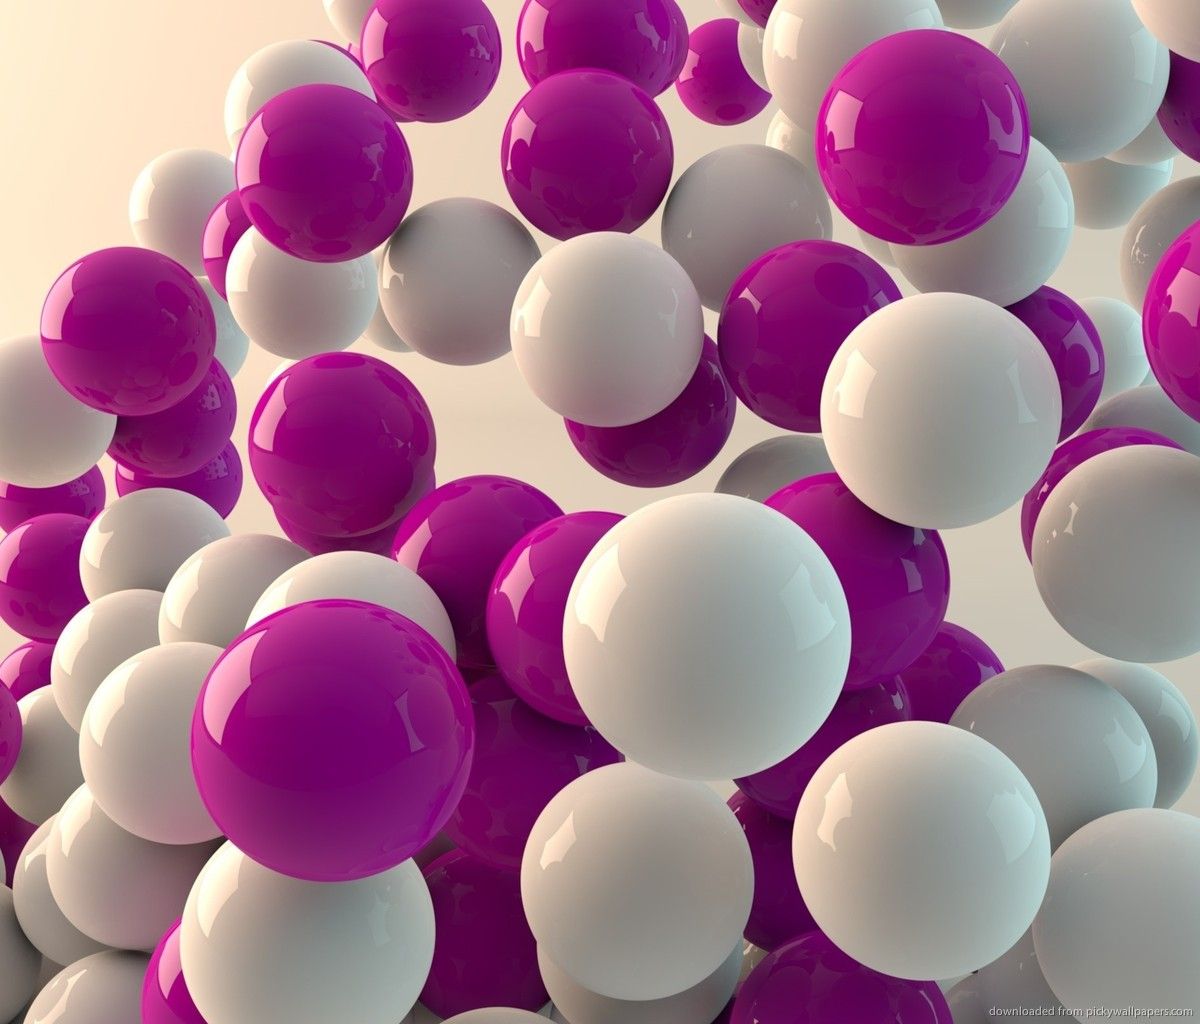 Download White And Purple Balls Wallpaper For Samsung Galaxy Tab